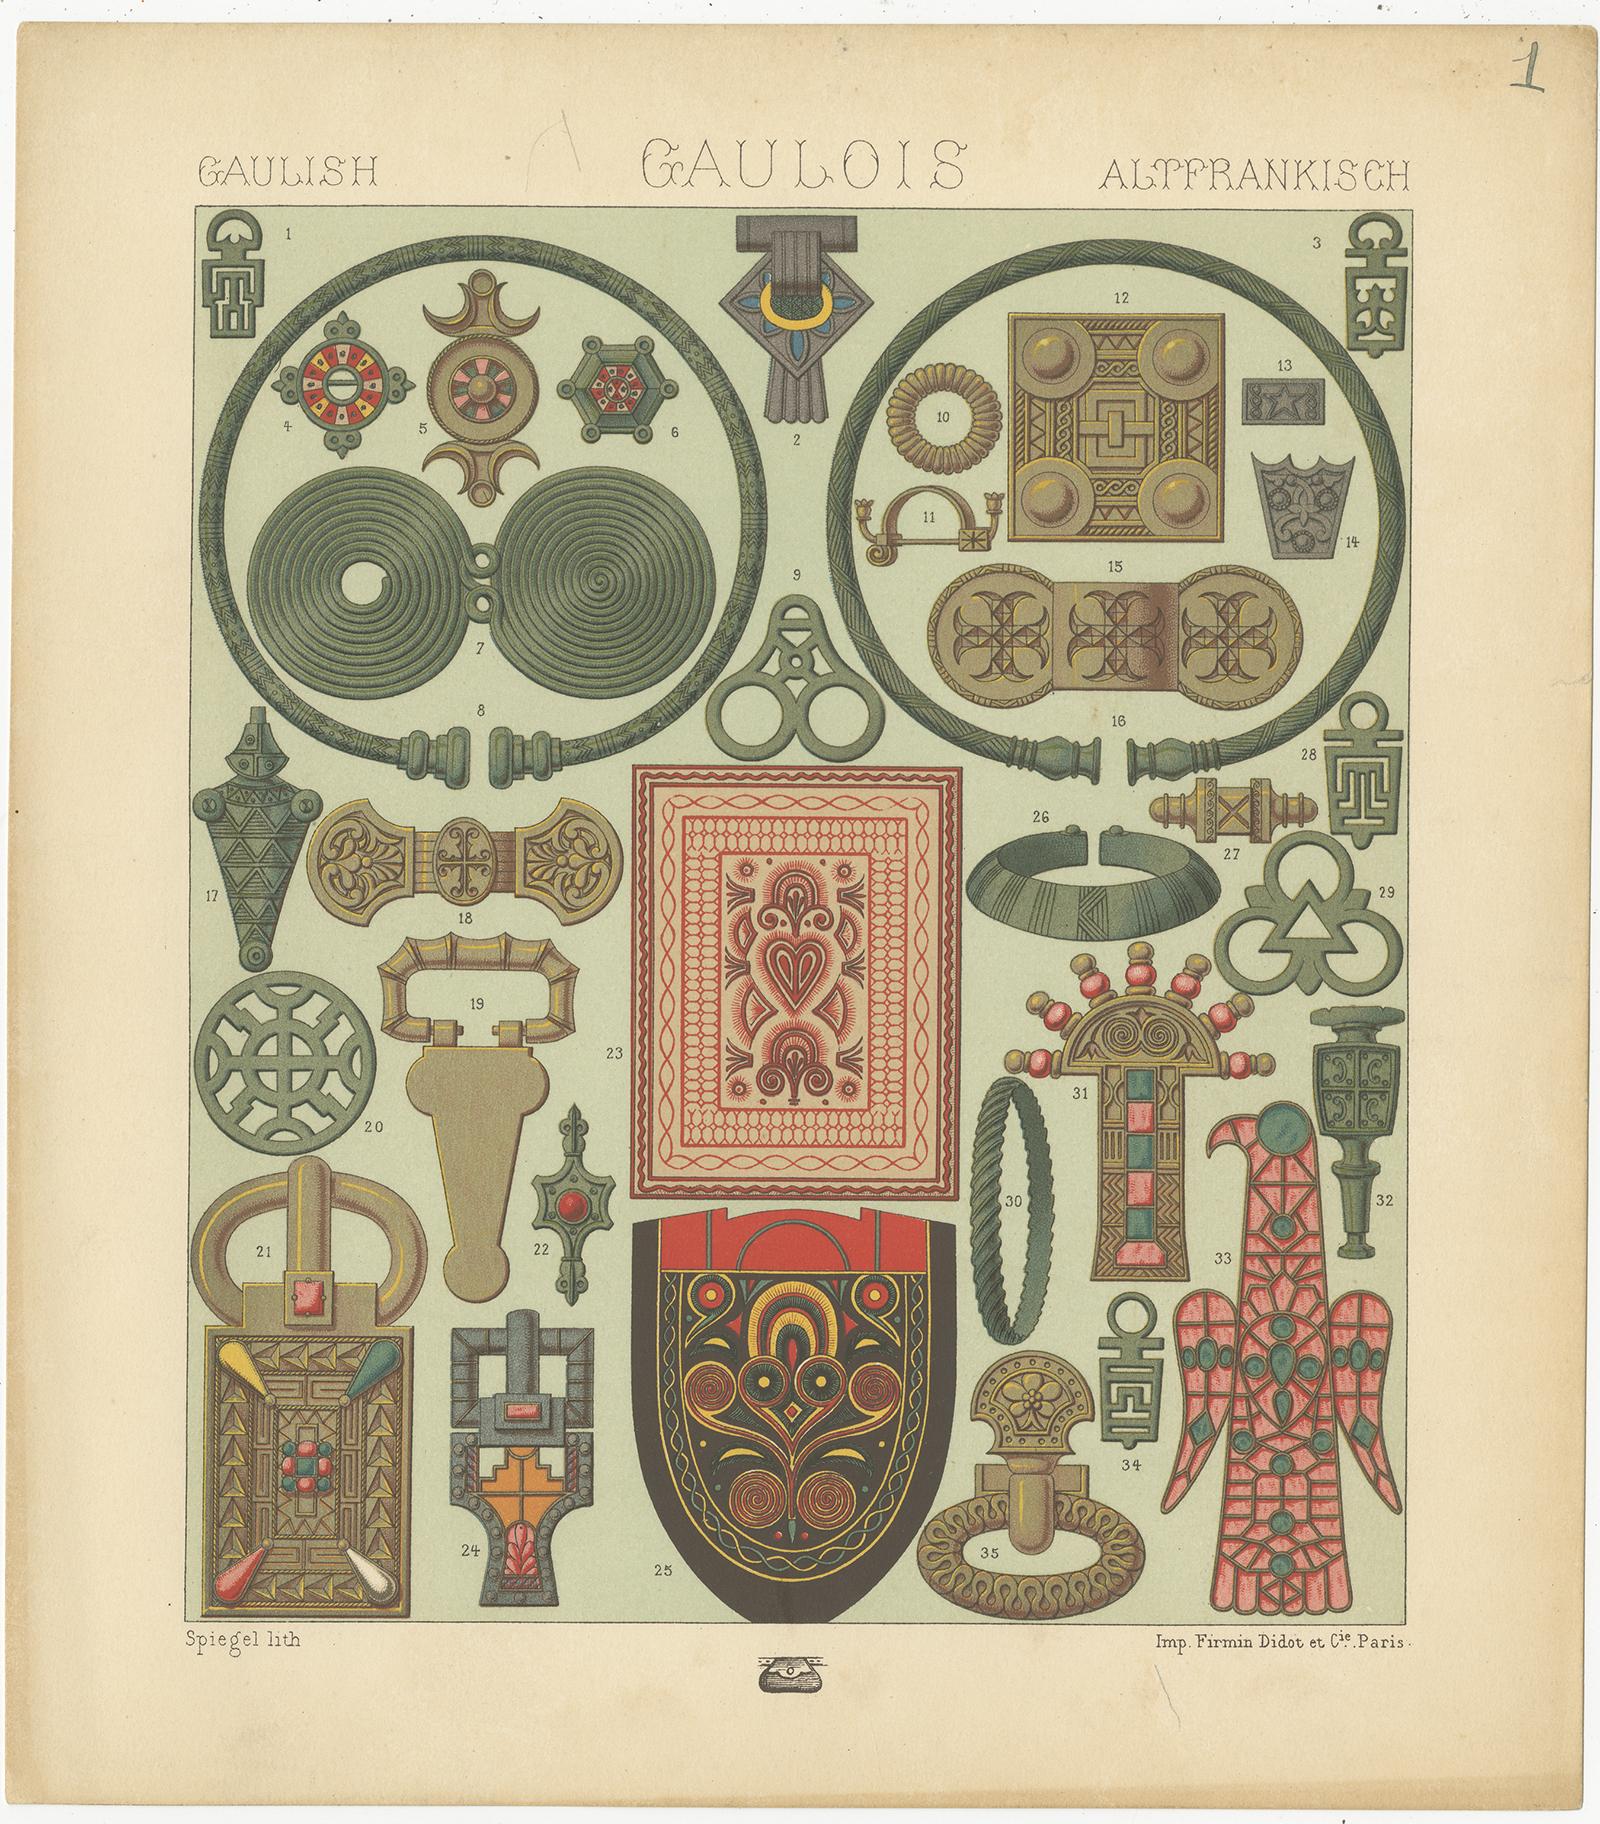 Antique print titled 'Gaulish - Gaulois - Altfrankisch'. Chromolithograph of French decorative objects. This print originates from 'Le Costume Historique' by M.A. Racinet. Published circa 1880.